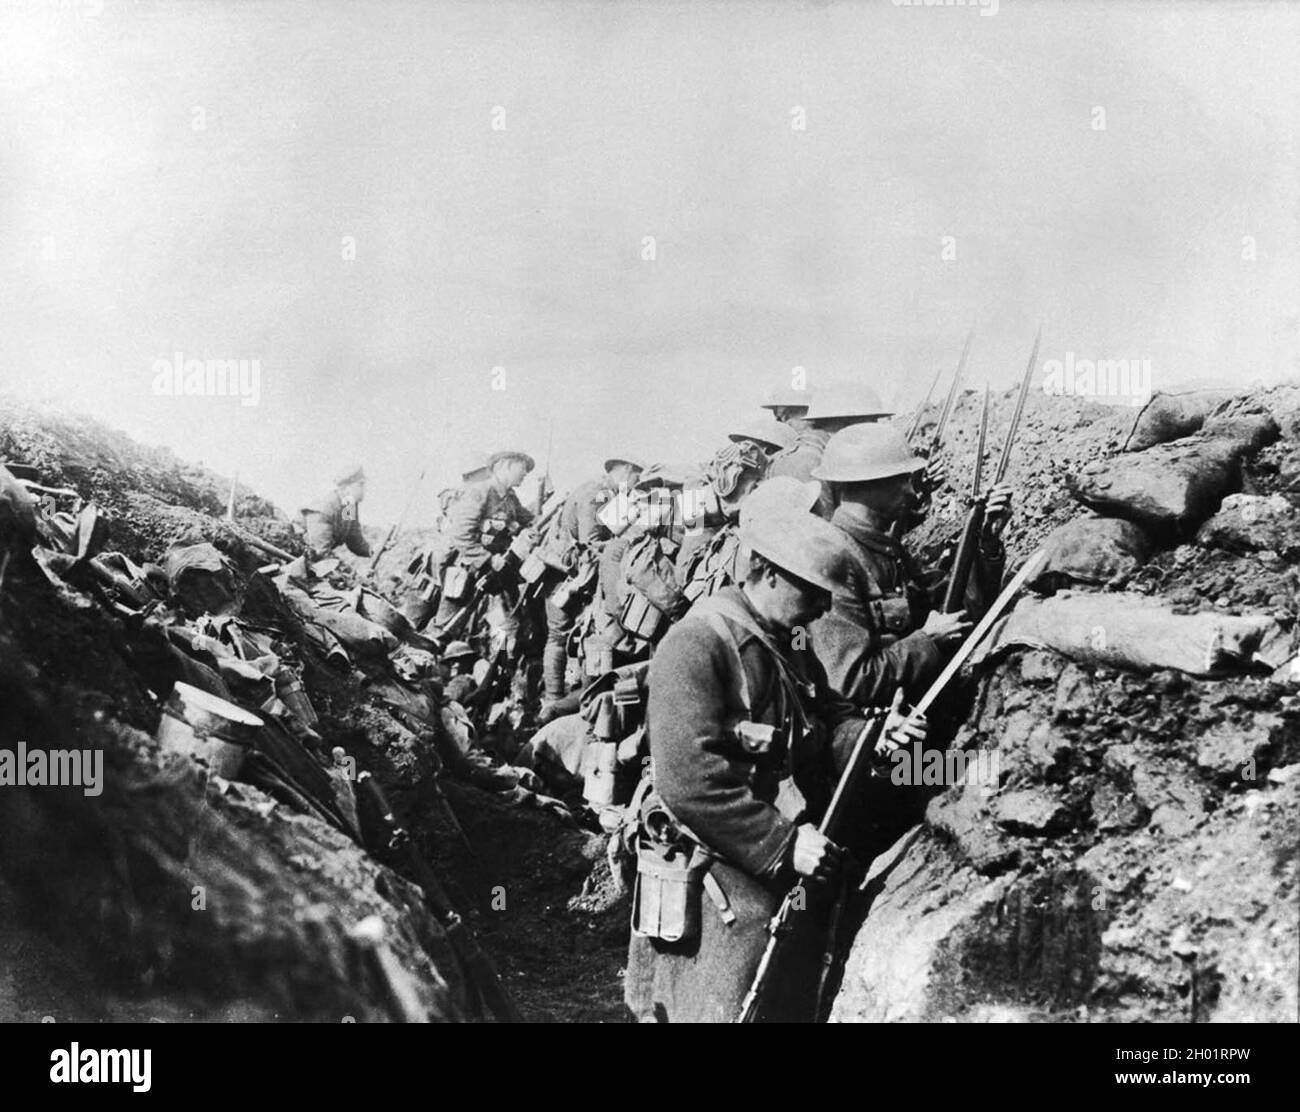 Ww1 Over The Top High Resolution Stock Photography and Images - Alamy